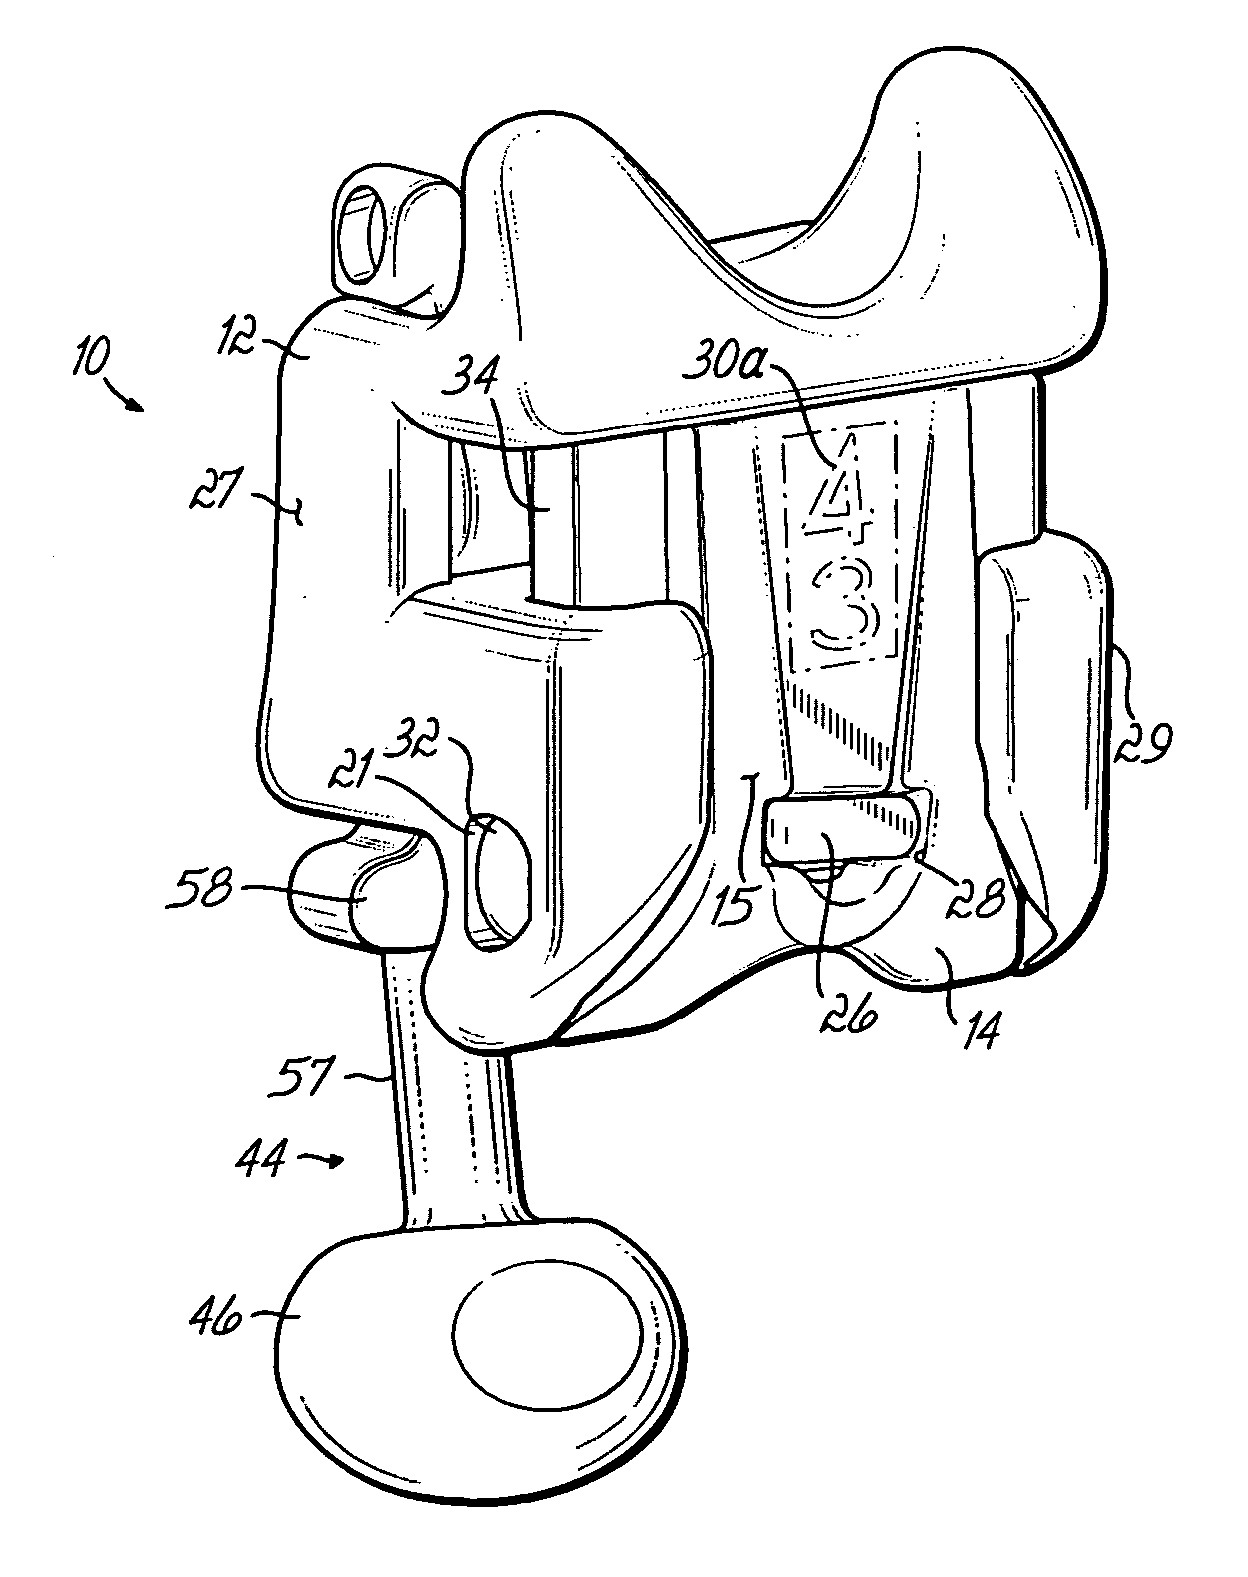 Orthodontic brackets and appliances and methods of making and using orthodontic brackets